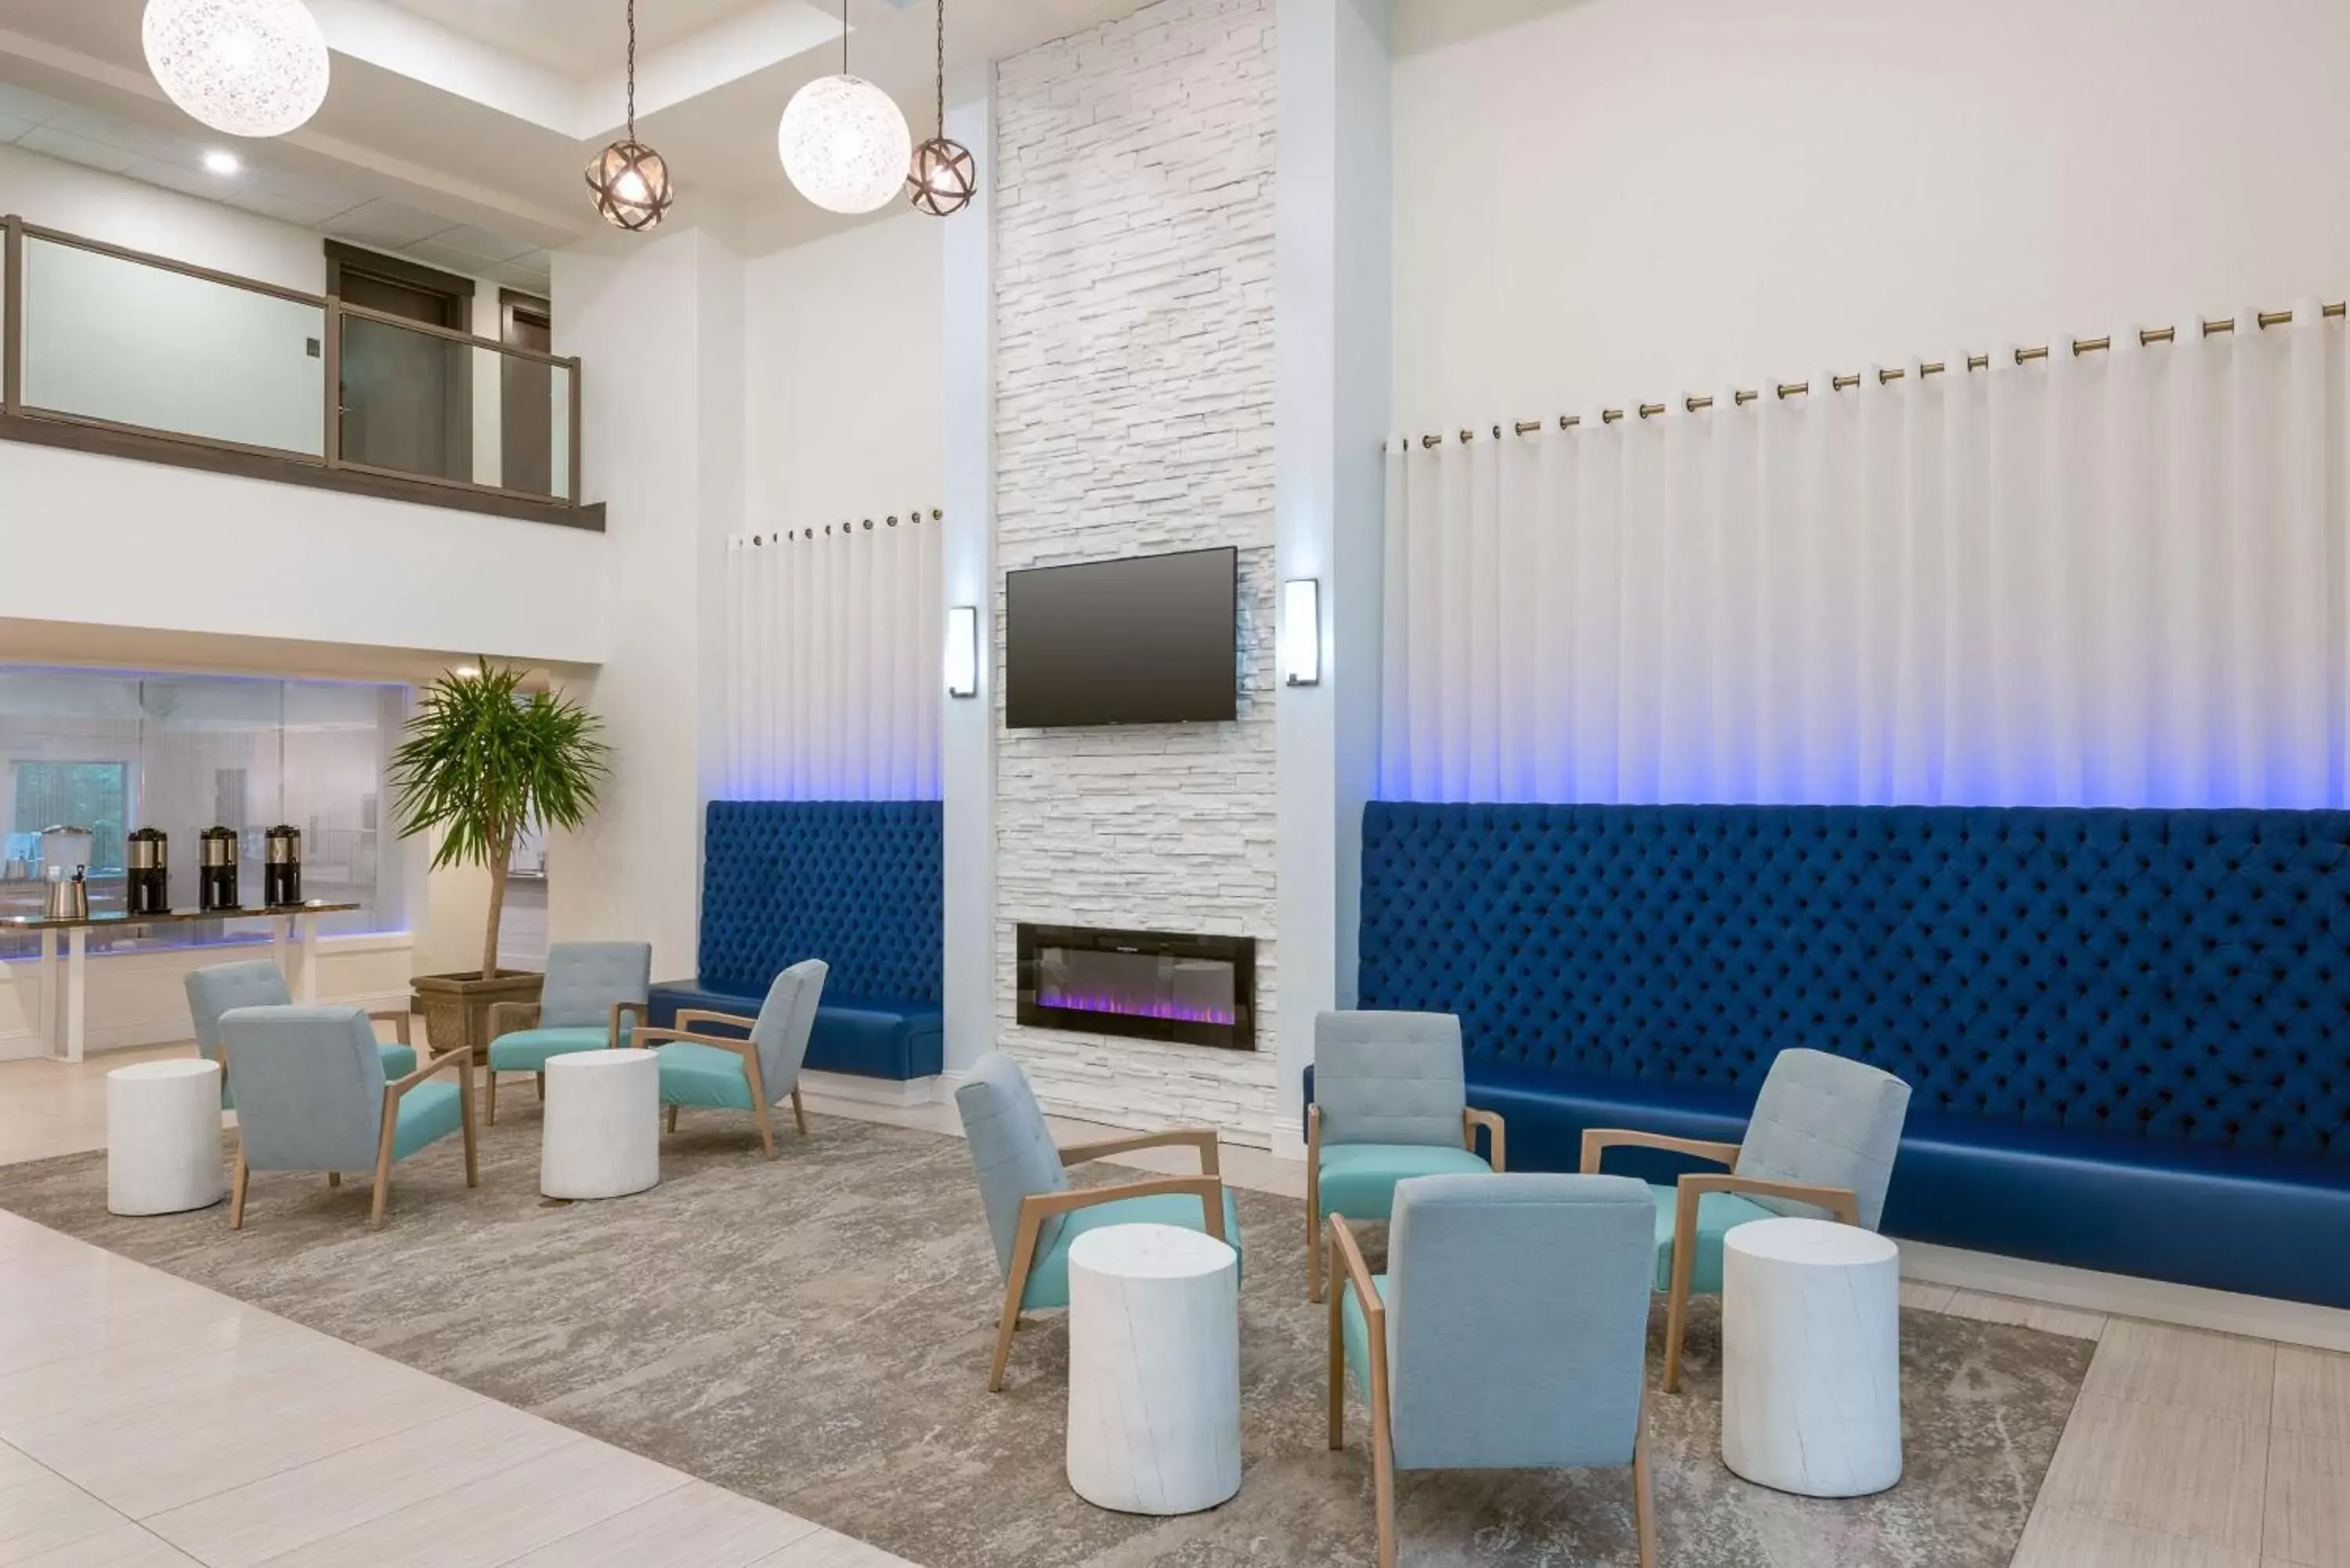 Lobby or reception in Ameniti Bay - Best Western Signature Collection